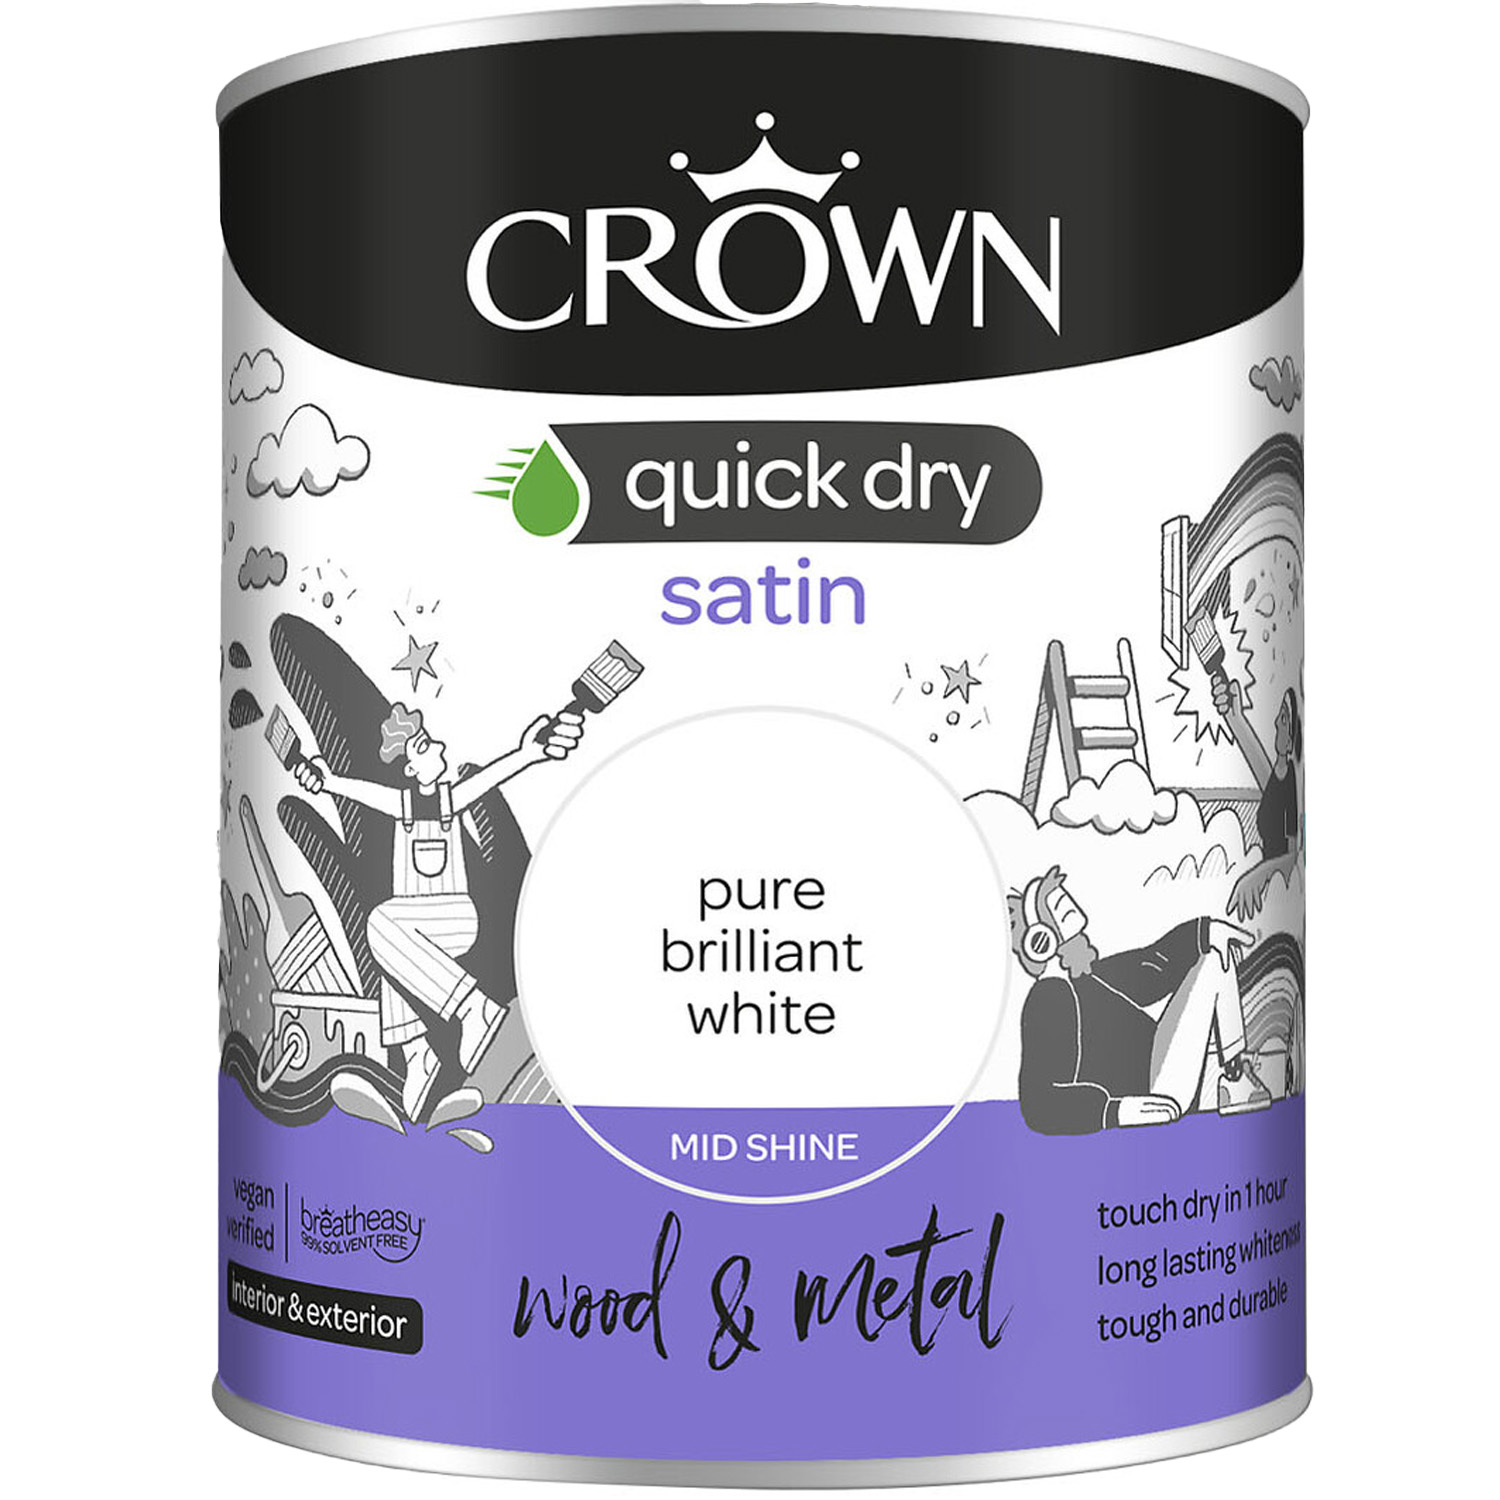 Crown Quick Dry Wood and Metal Pure Brilliant White Satin Paint 750ml Image 2